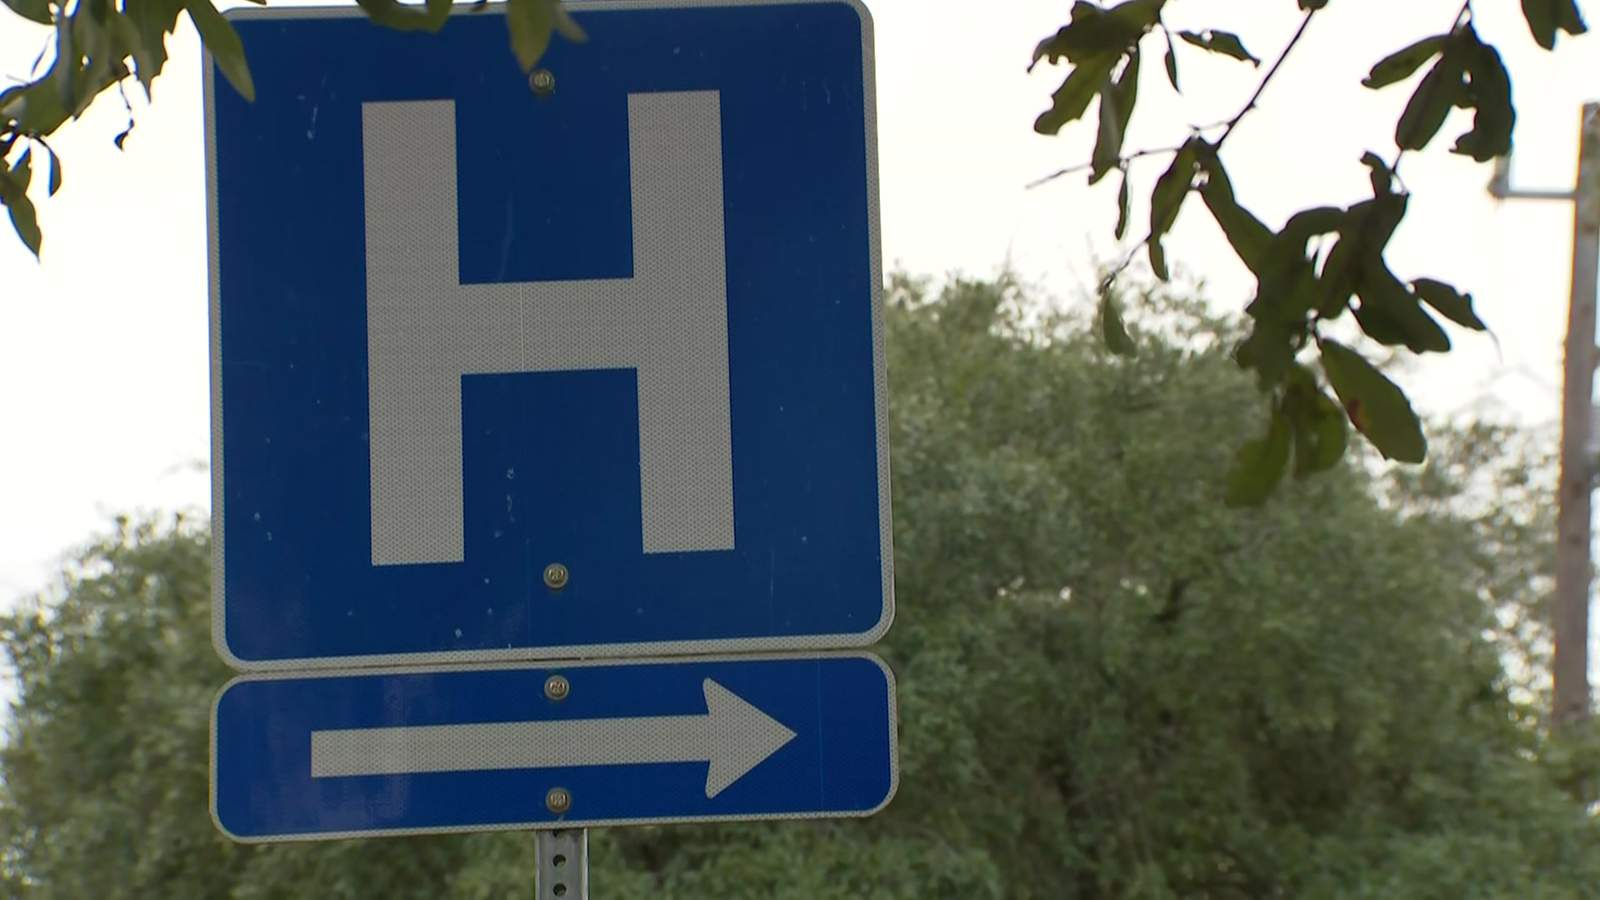 MHA: Younger age groups driving rise in Michigan COVID-19 hospitalizations